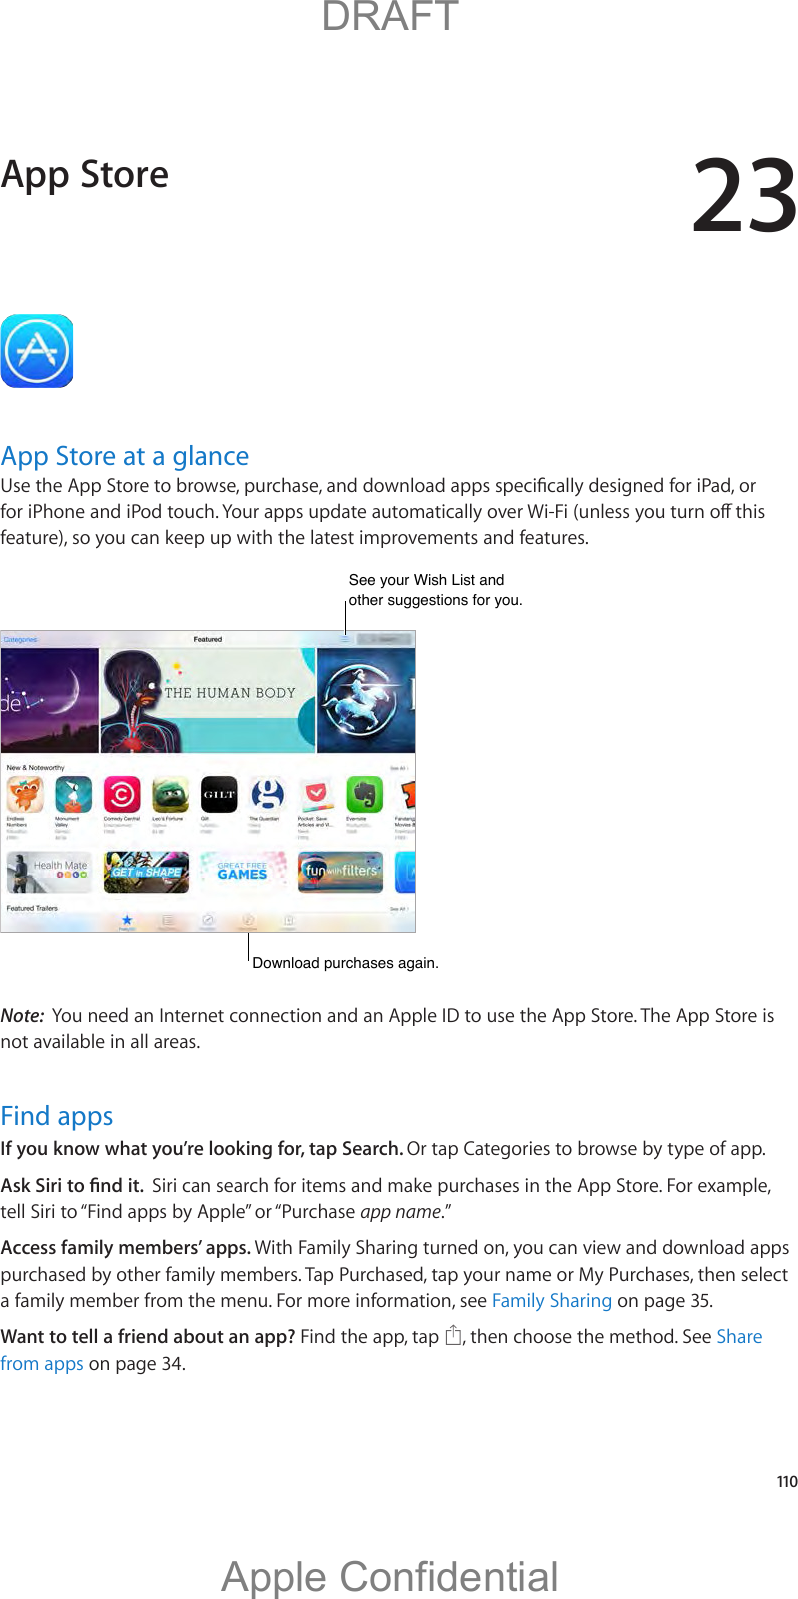 23   110App Store at a glancefeature), so you can keep up with the latest improvements and features.See your Wish List and other suggestions for you.See your Wish List and other suggestions for you.Download purchases again.Download purchases again.Note:  You need an Internet connection and an Apple ID to use the App Store. The App Store is not available in all areas.Find appsIf you know what you’re looking for, tap Search. Or tap Categories to browse by type of app.Siri can search for items and make purchases in the App Store. For example, tell Siri to “Find apps by Apple” or “Purchase app name.”Access family members’ apps. With Family Sharing turned on, you can view and download apps purchased by other family members. Tap Purchased, tap your name or My Purchases, then select a family member from the menu. For more information, see Family Sharing on page 35.Want to tell a friend about an app? Find the app, tap  , then choose the method. See Share from apps on page 34.App Store          DRAFTApple Confidential